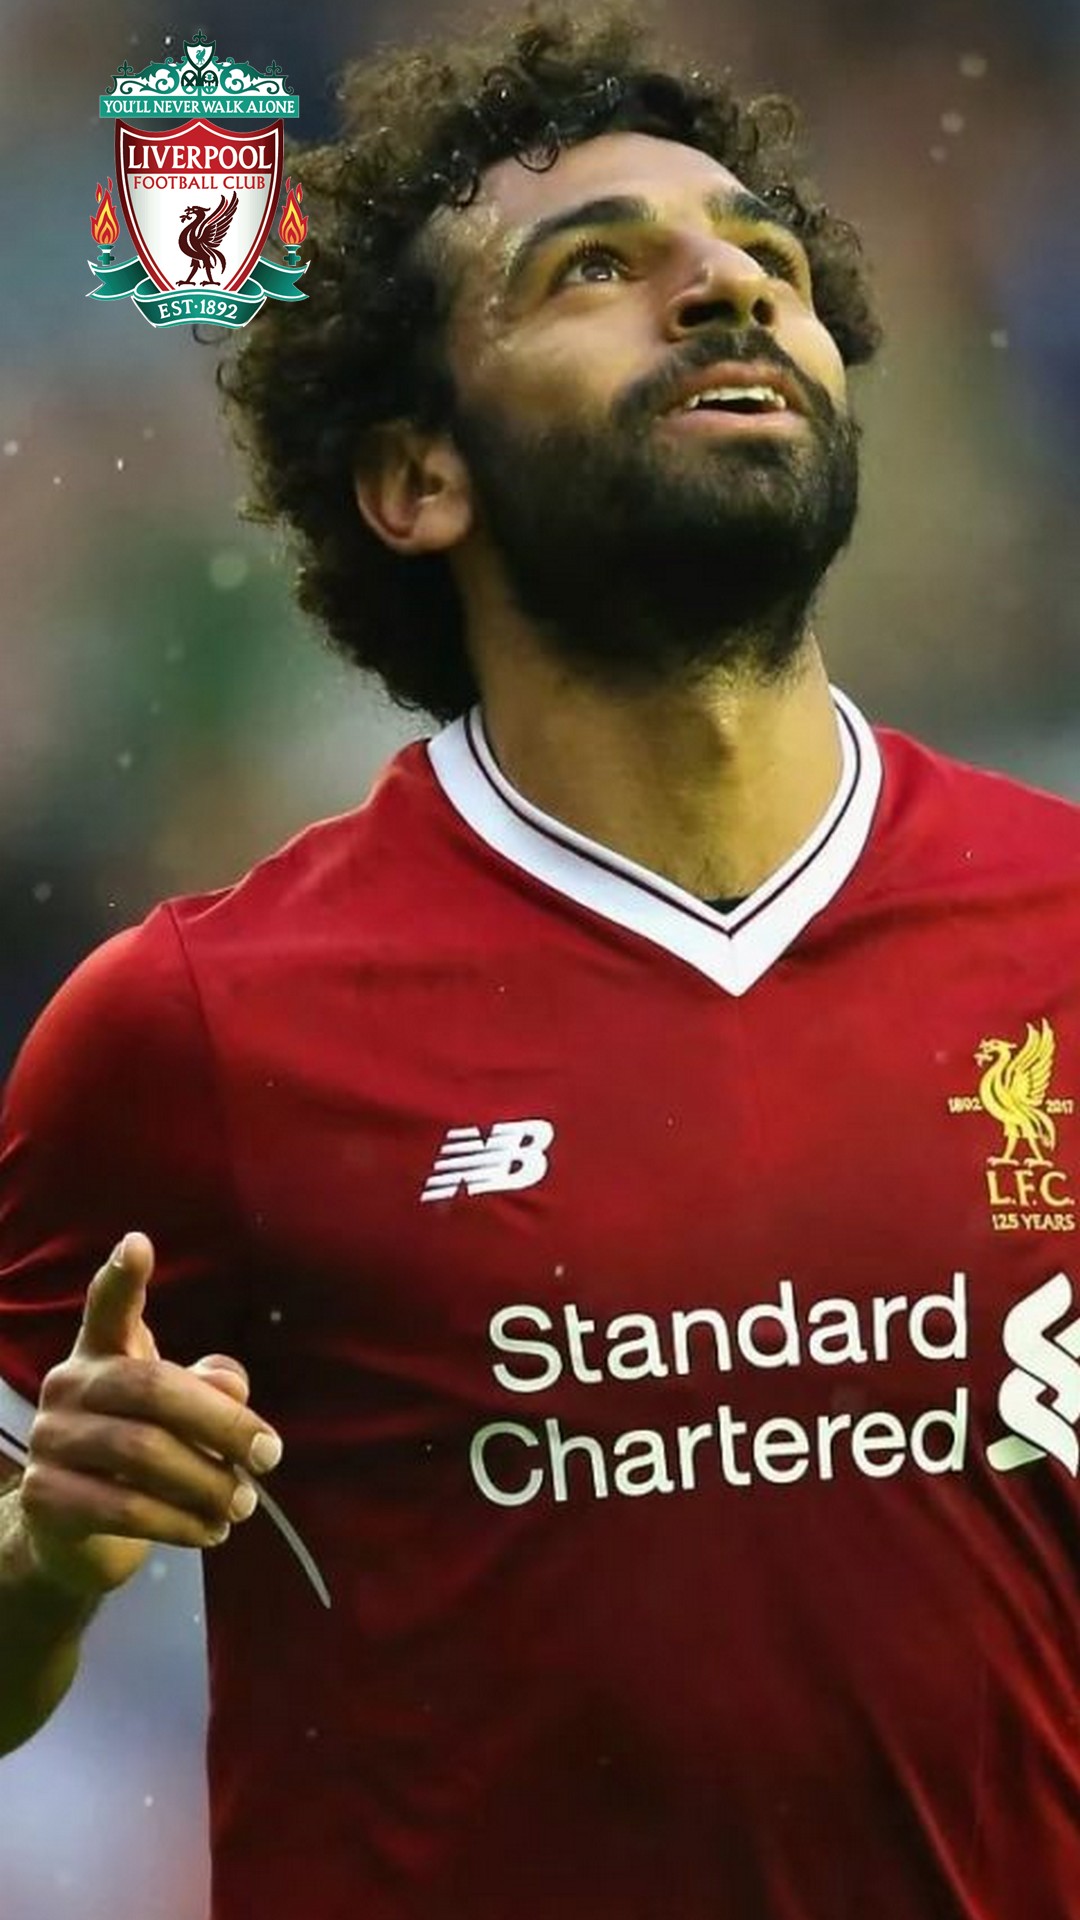 Wallpaper Android Mohamed Salah Liverpool with resolution 1080X1920 pixel. You can make this wallpaper for your Android backgrounds, Tablet, Smartphones Screensavers and Mobile Phone Lock Screen